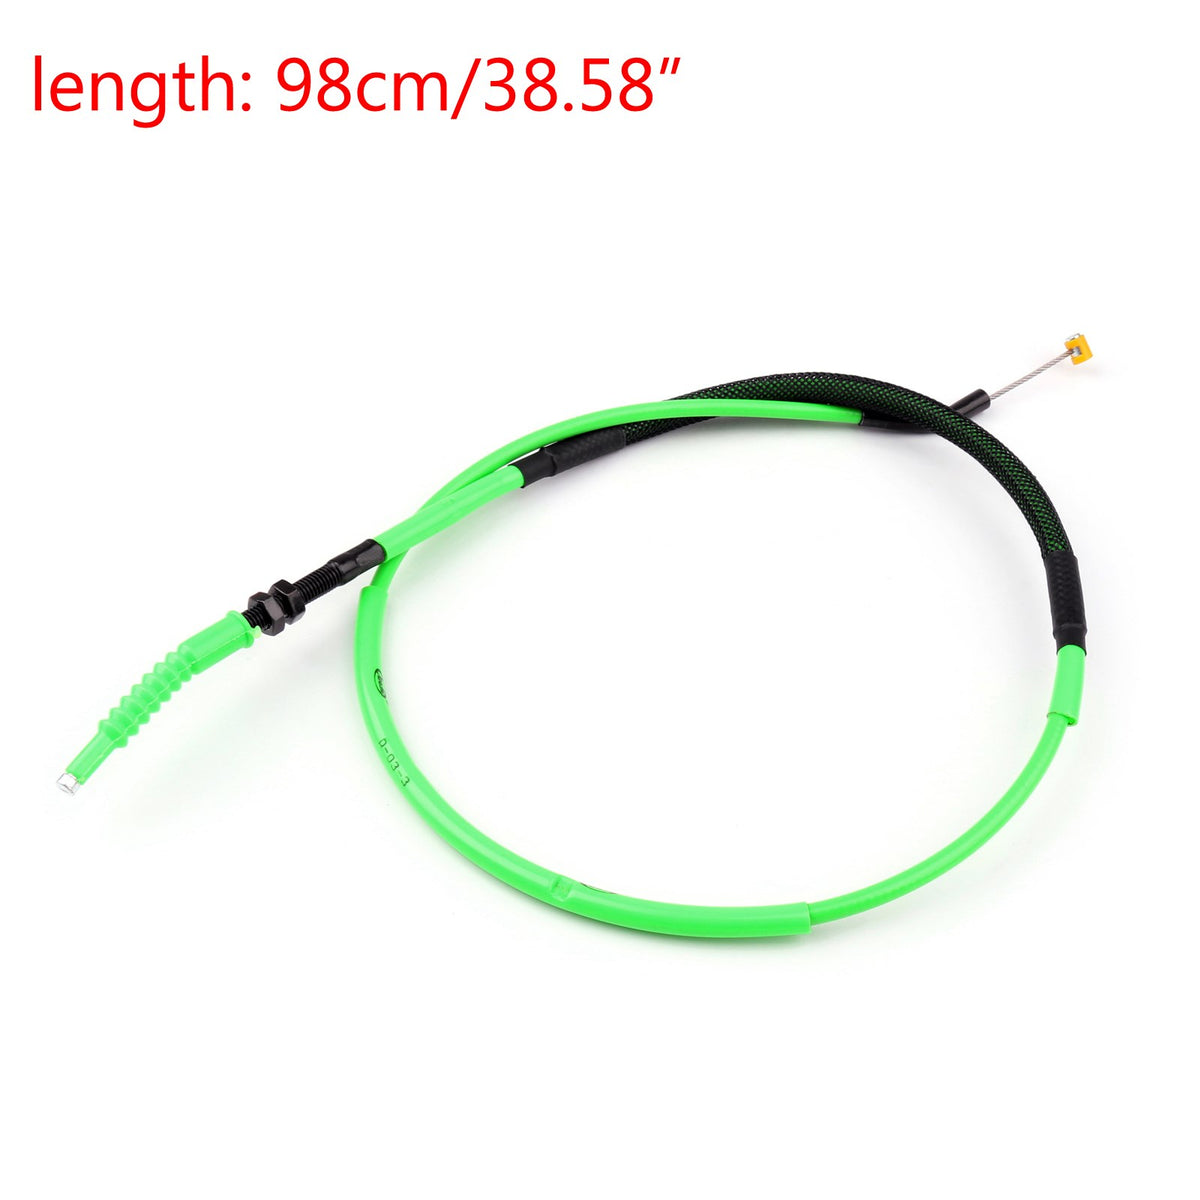 Wire Steel Clutch Cable Replacement For Kawasaki Ninja ZX-6R 2009-2016 Green